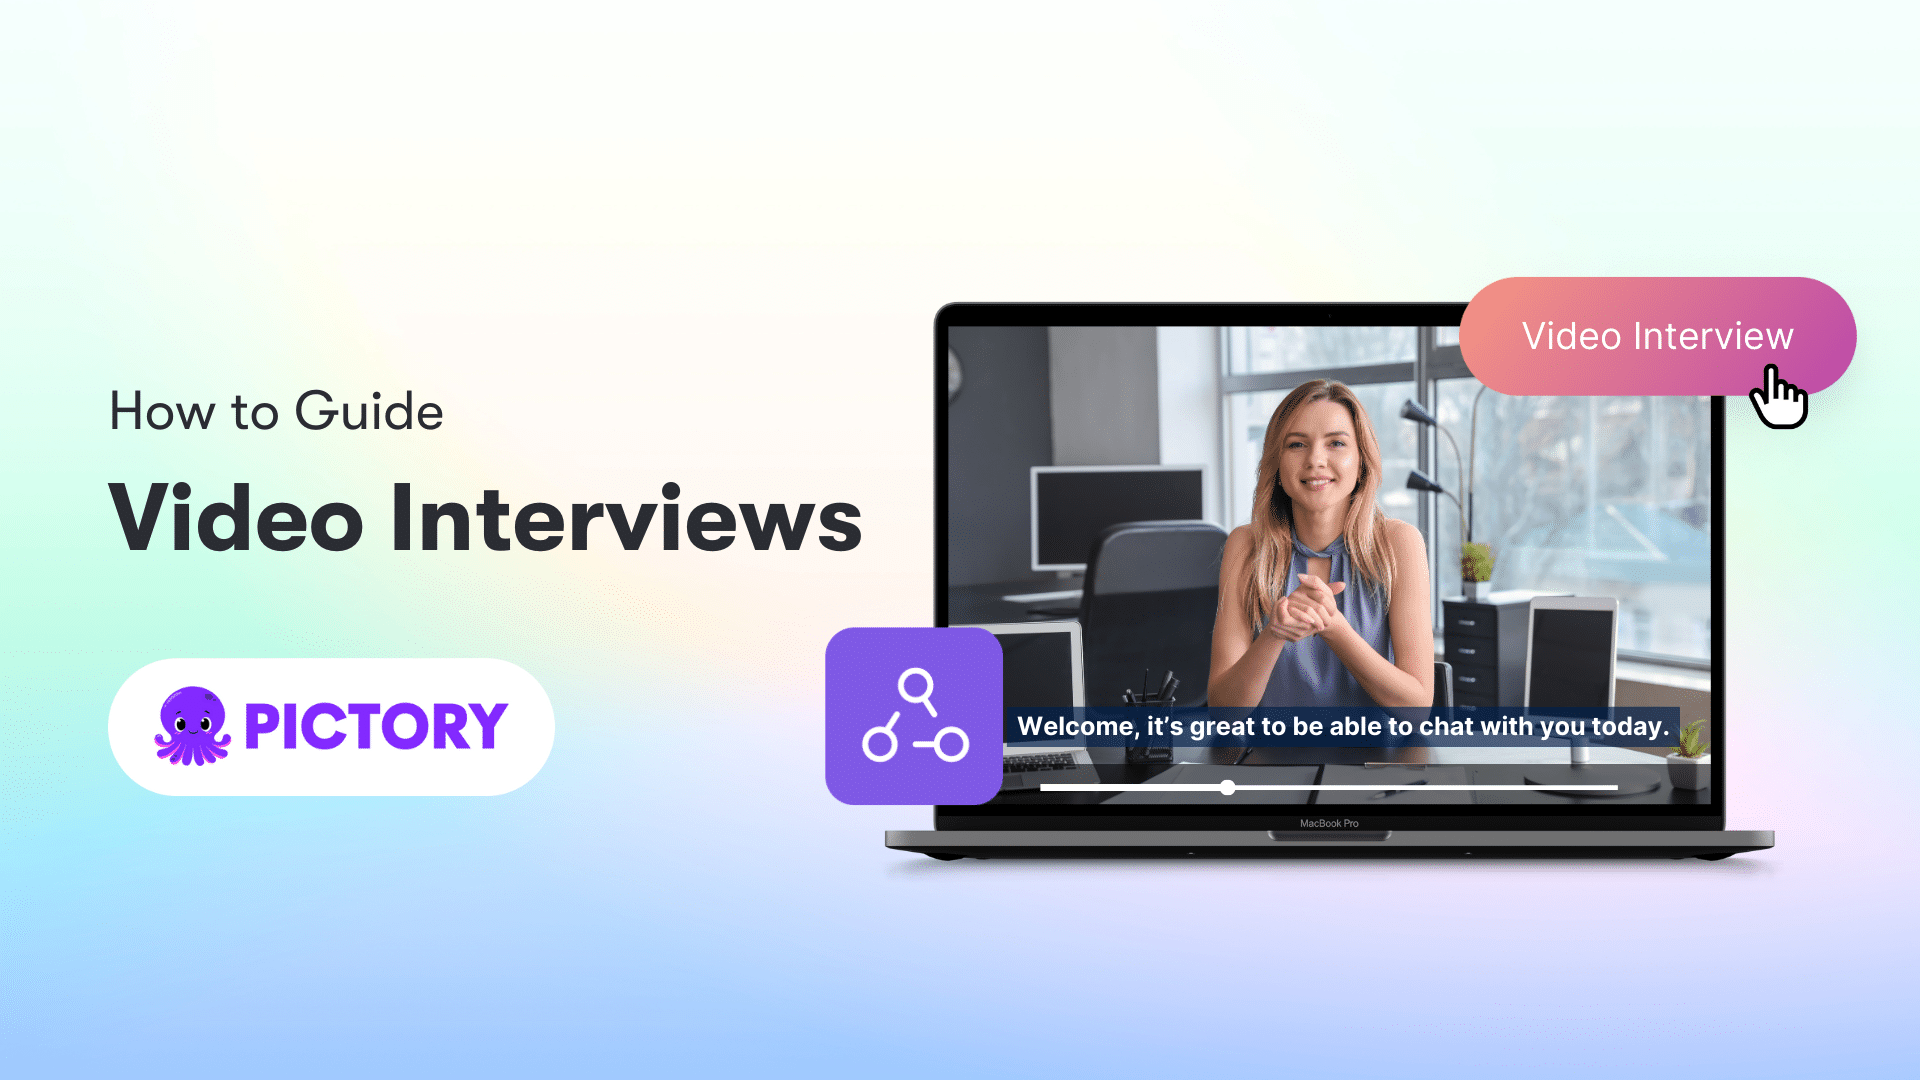 Corporate Video Interviews - a How-to Guide